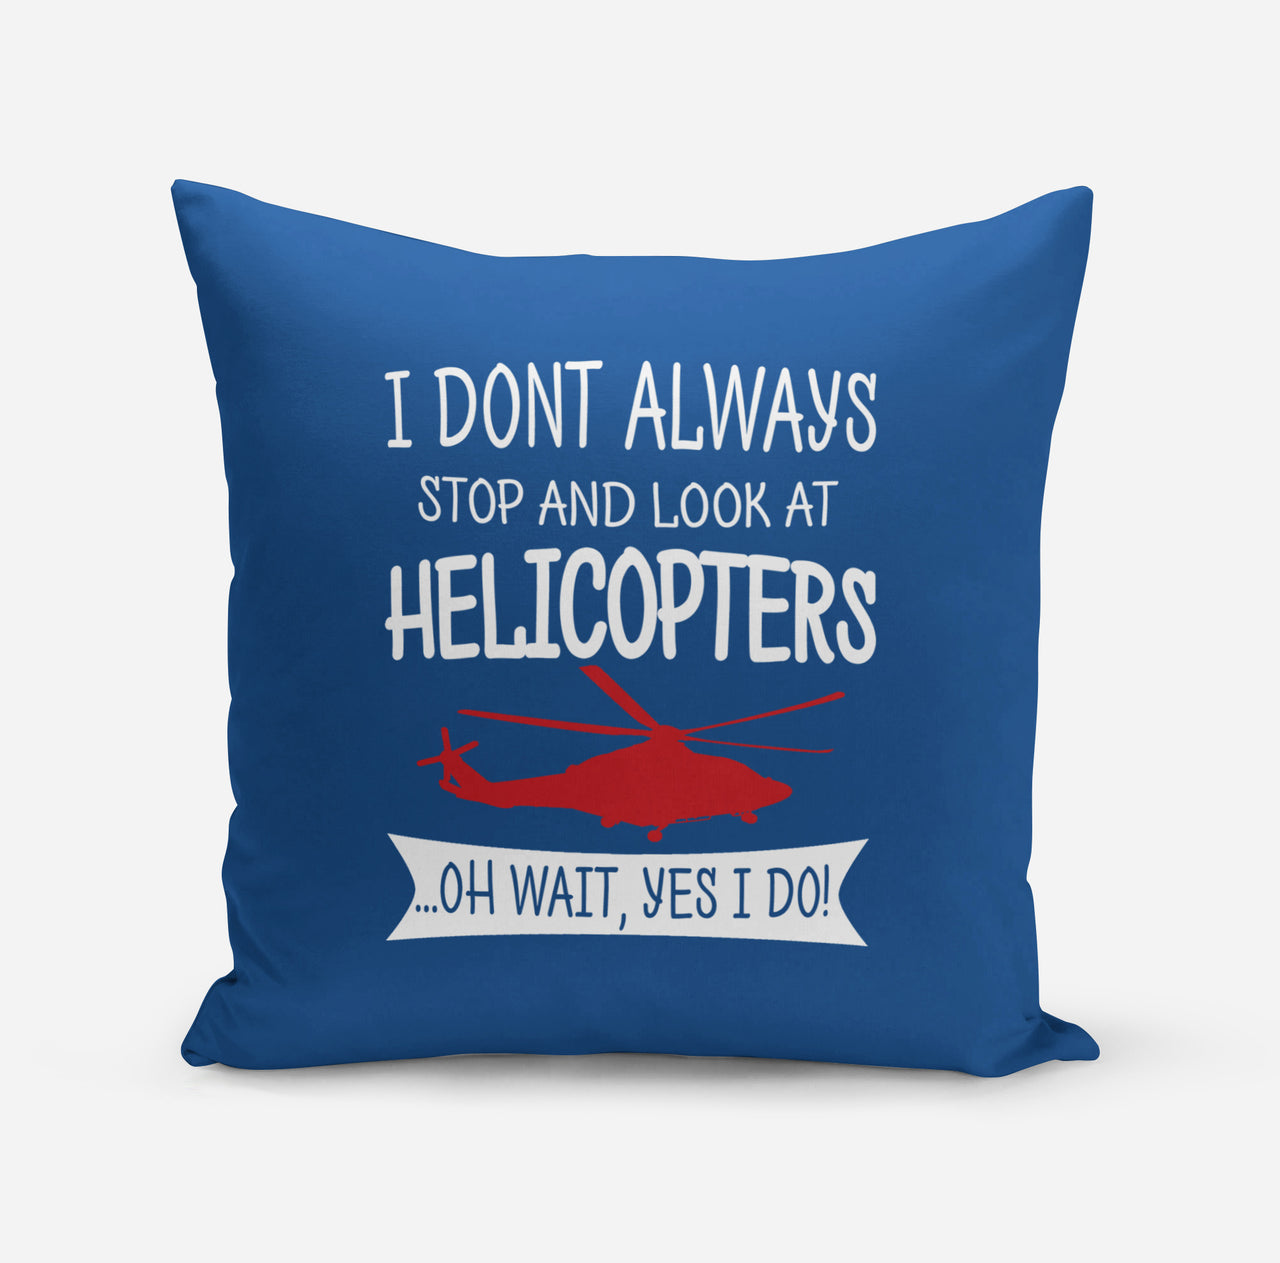 I Don't Always Stop and Look at Helicopters Designed Pillows